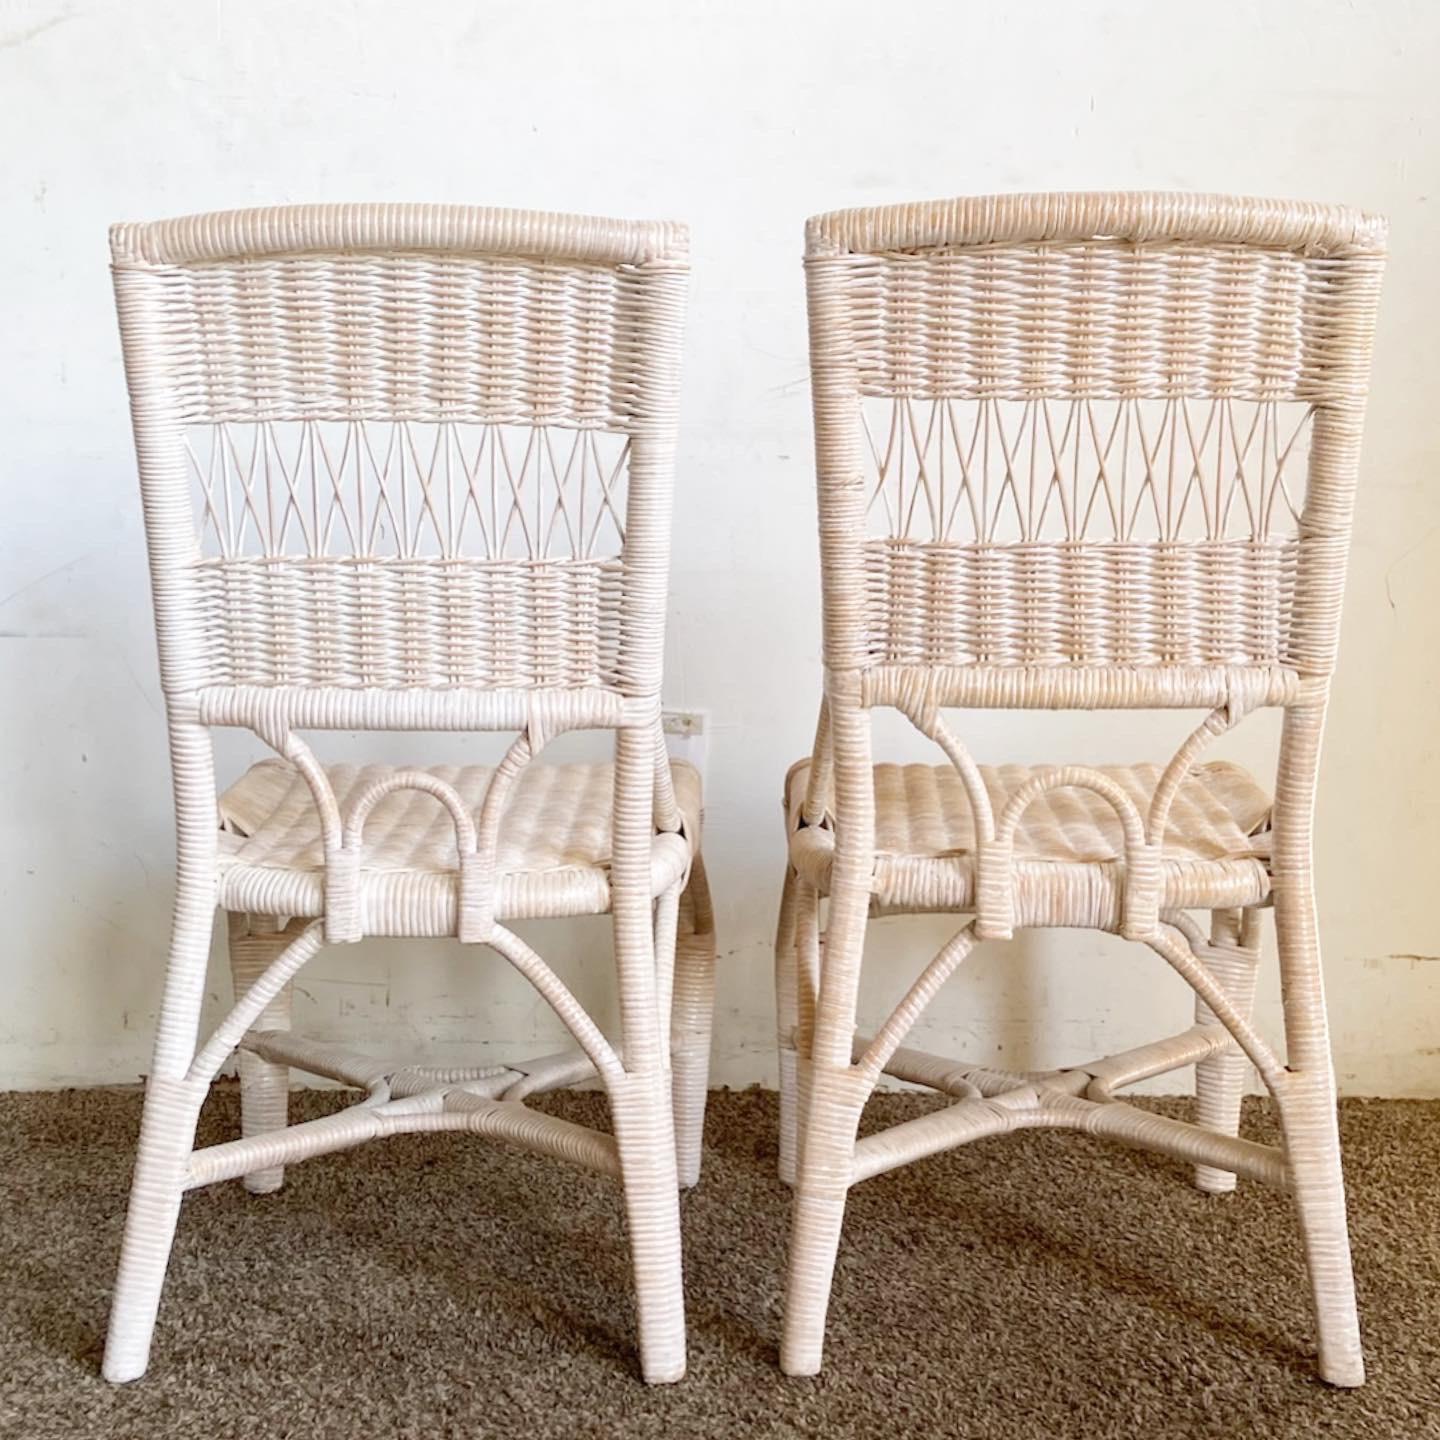 20th Century Boho Chic White Washed Wicker Rattan Side Chairs - a Pair For Sale